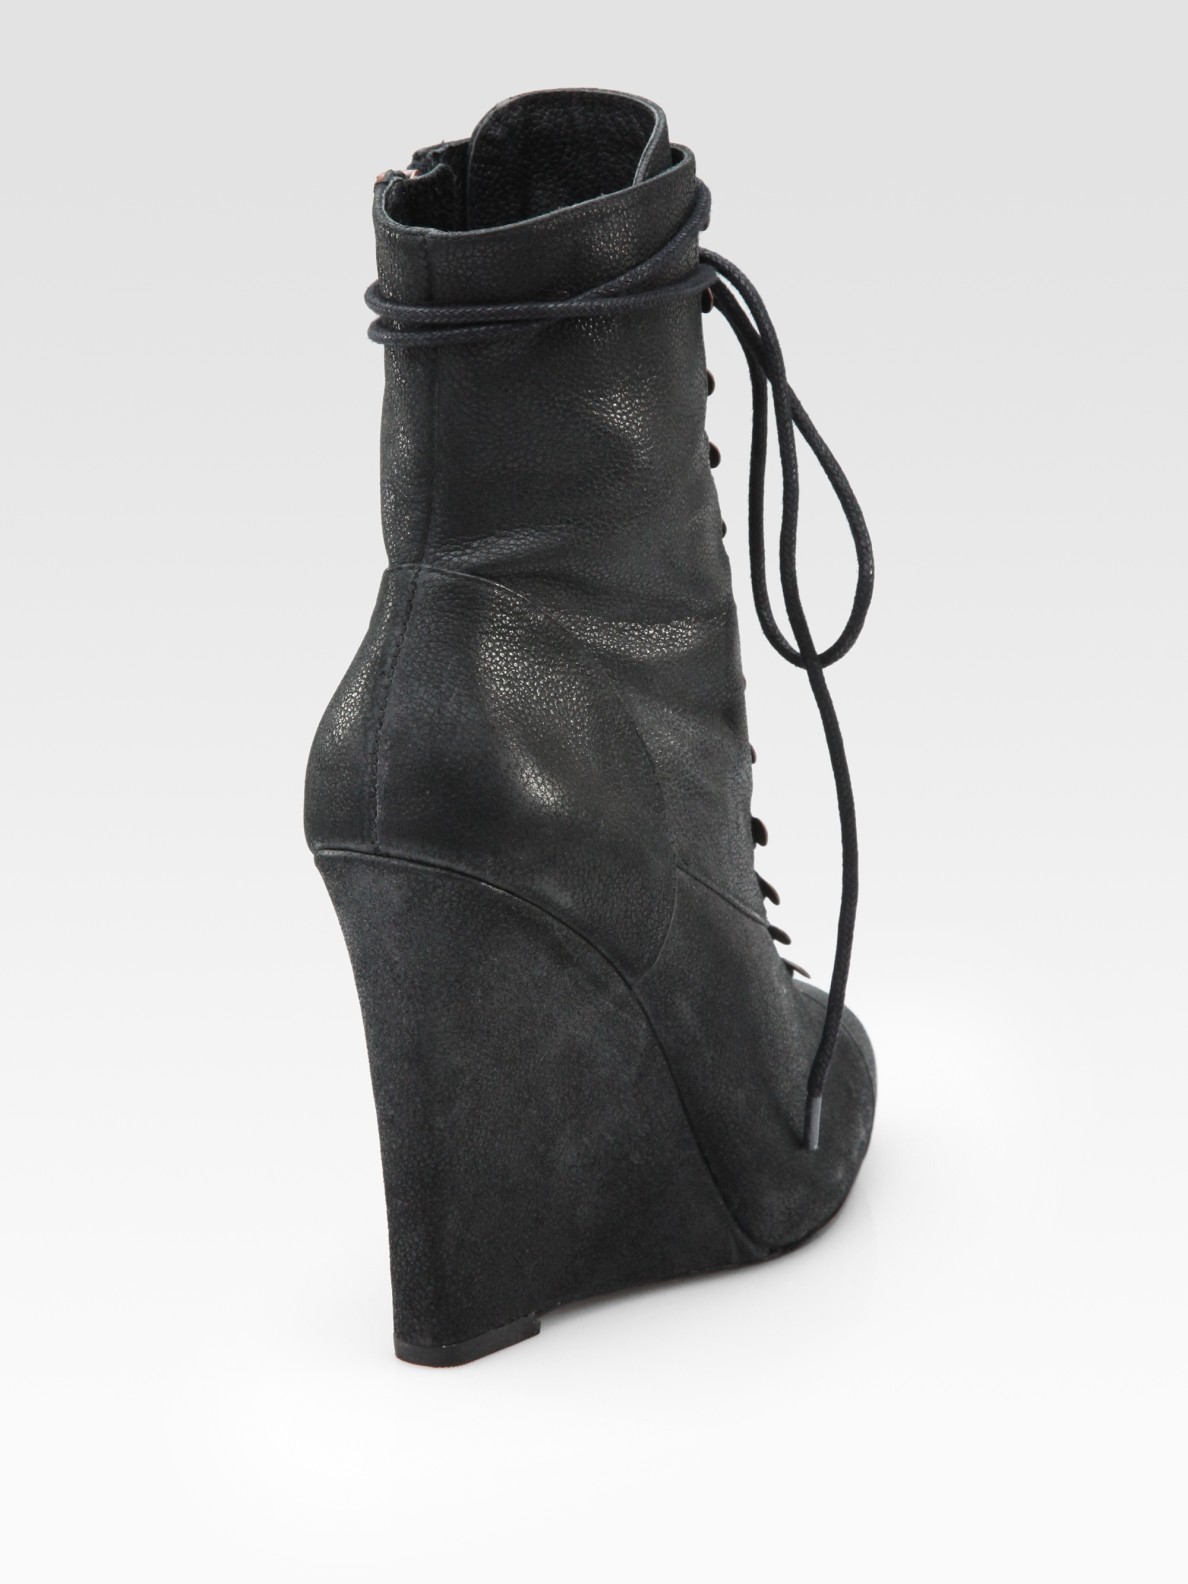 Joie Break On Through Leather Lace-up Wedge Ankle Boots in Black - Lyst